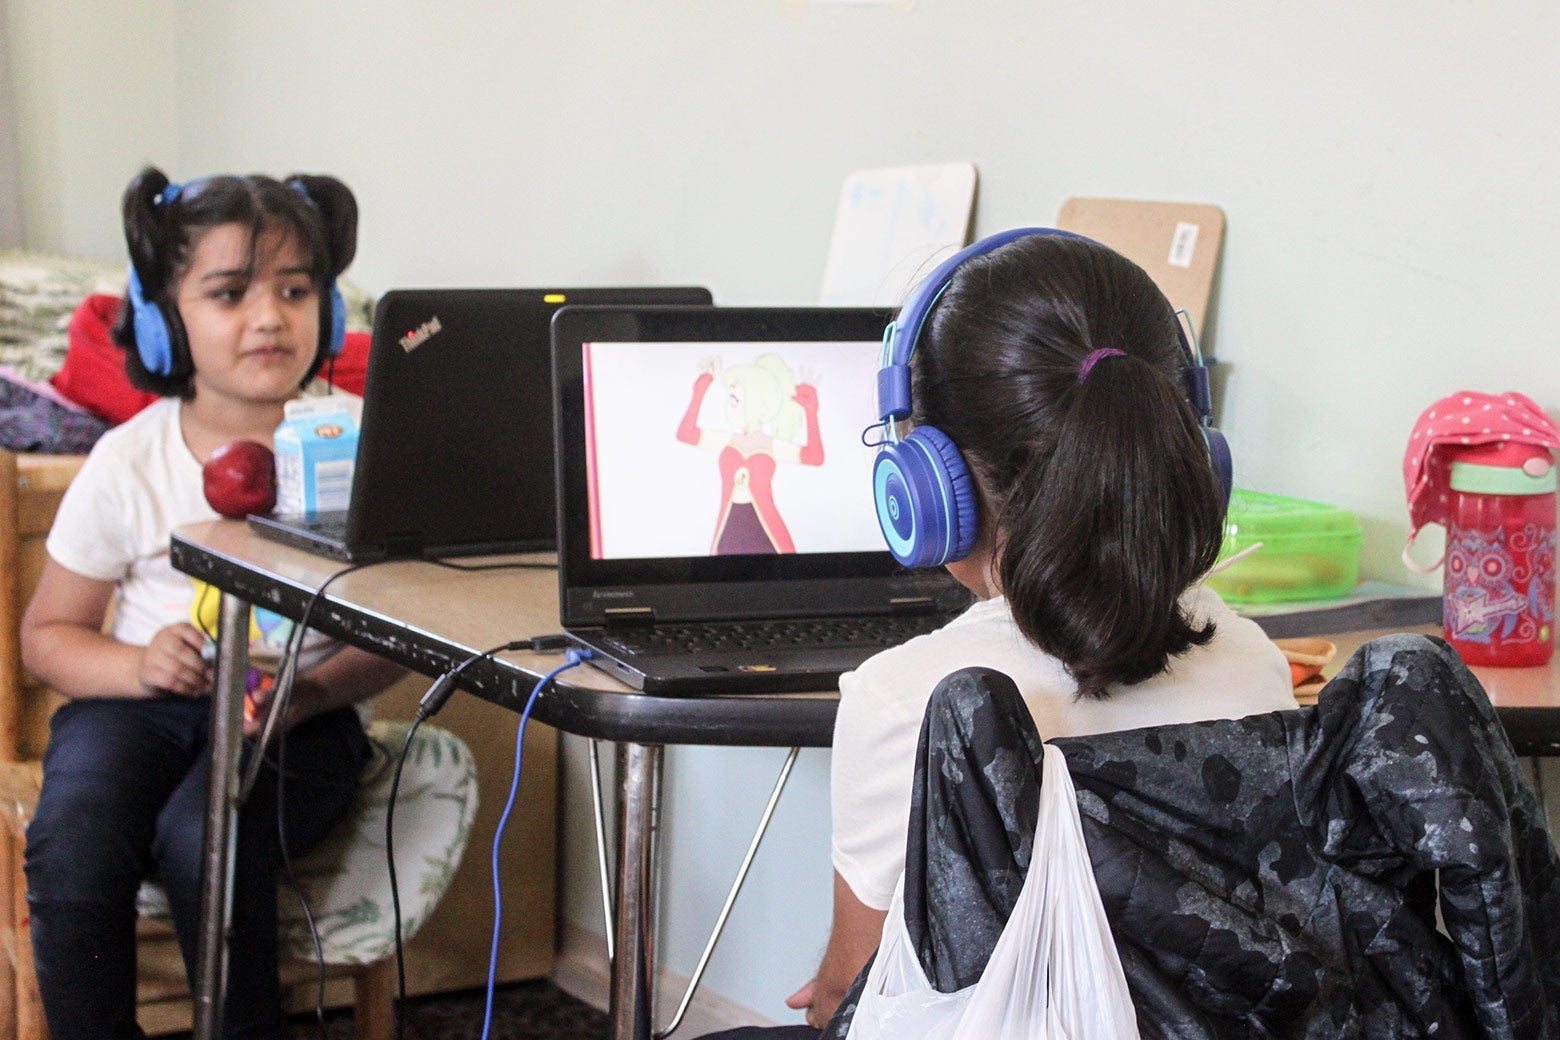 Two small children in large blue headphones sit behind laptops.